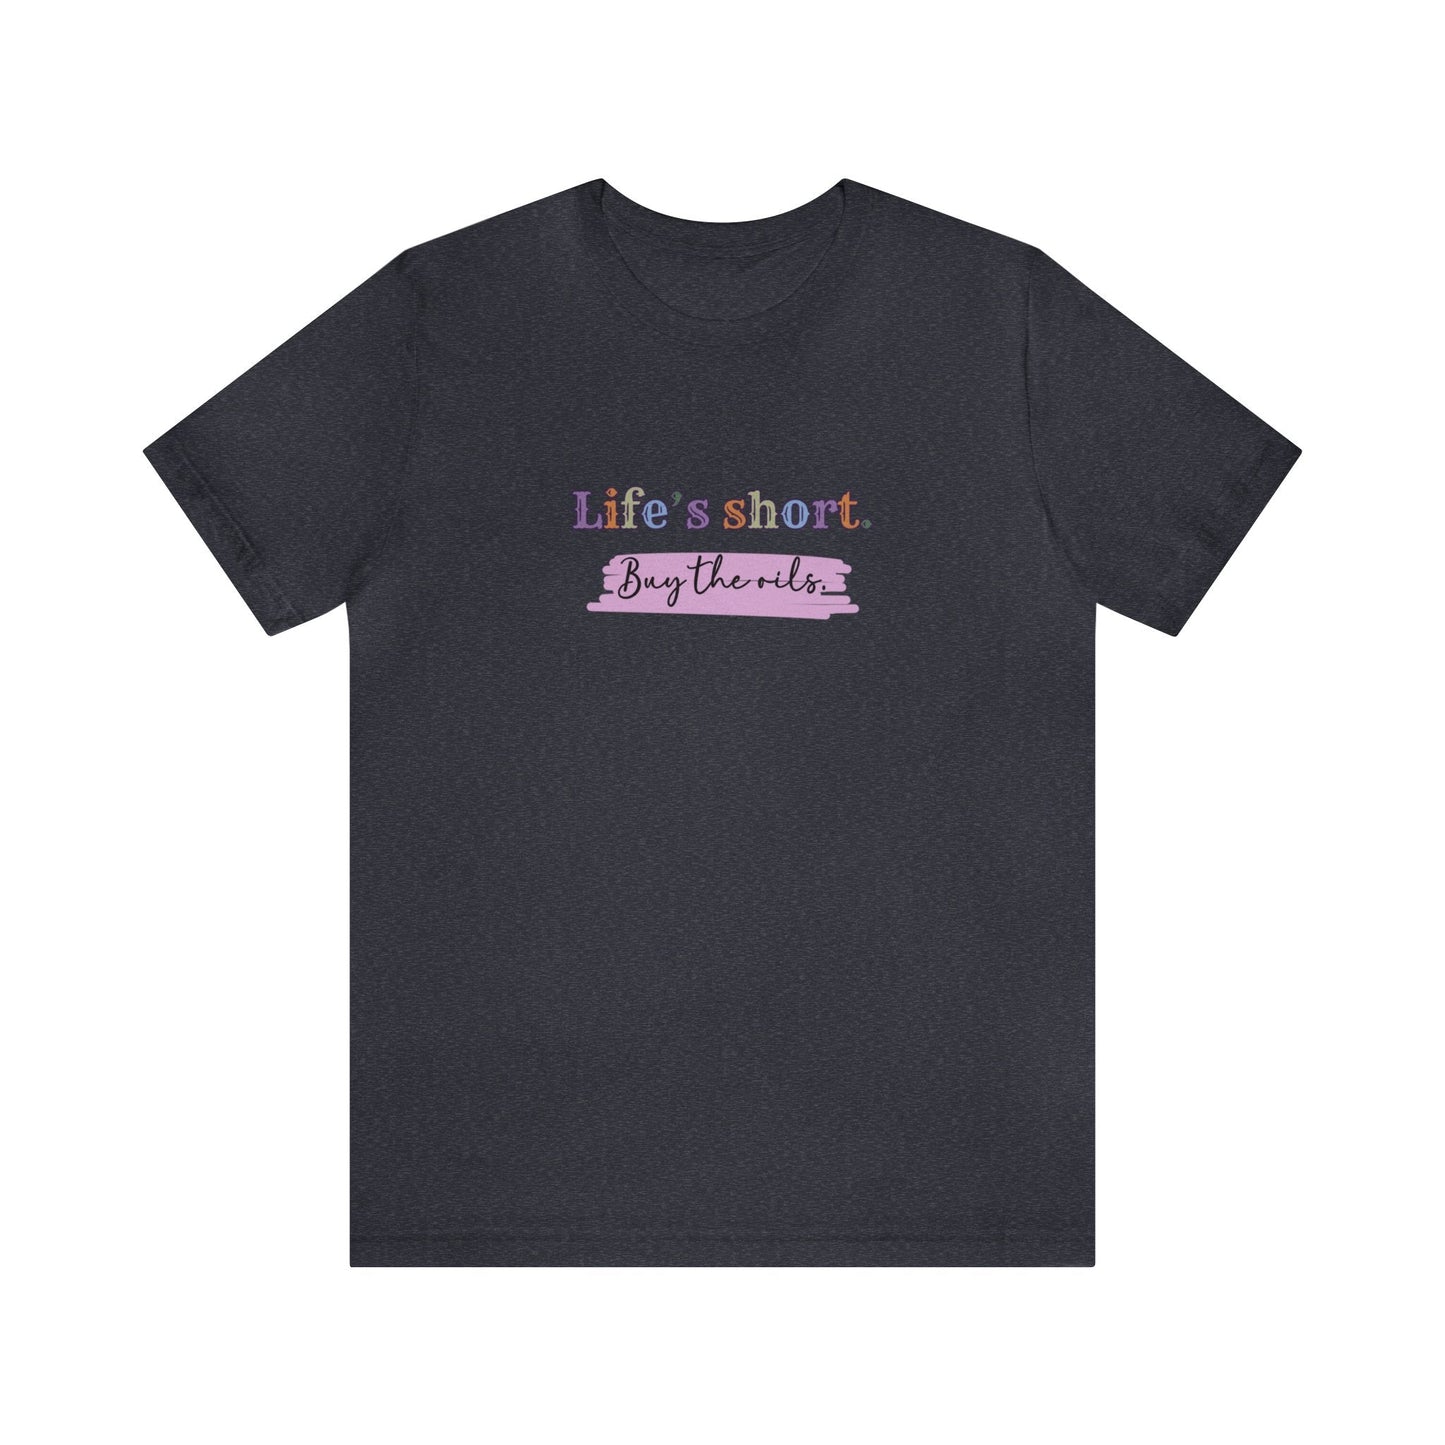 Life's Short Buy the Oils. Essential Oil Gifts. T-shirt for Essential Oil Fan. Essential Oil Coach Tshirt. Gifts for Her. Mom Gift.